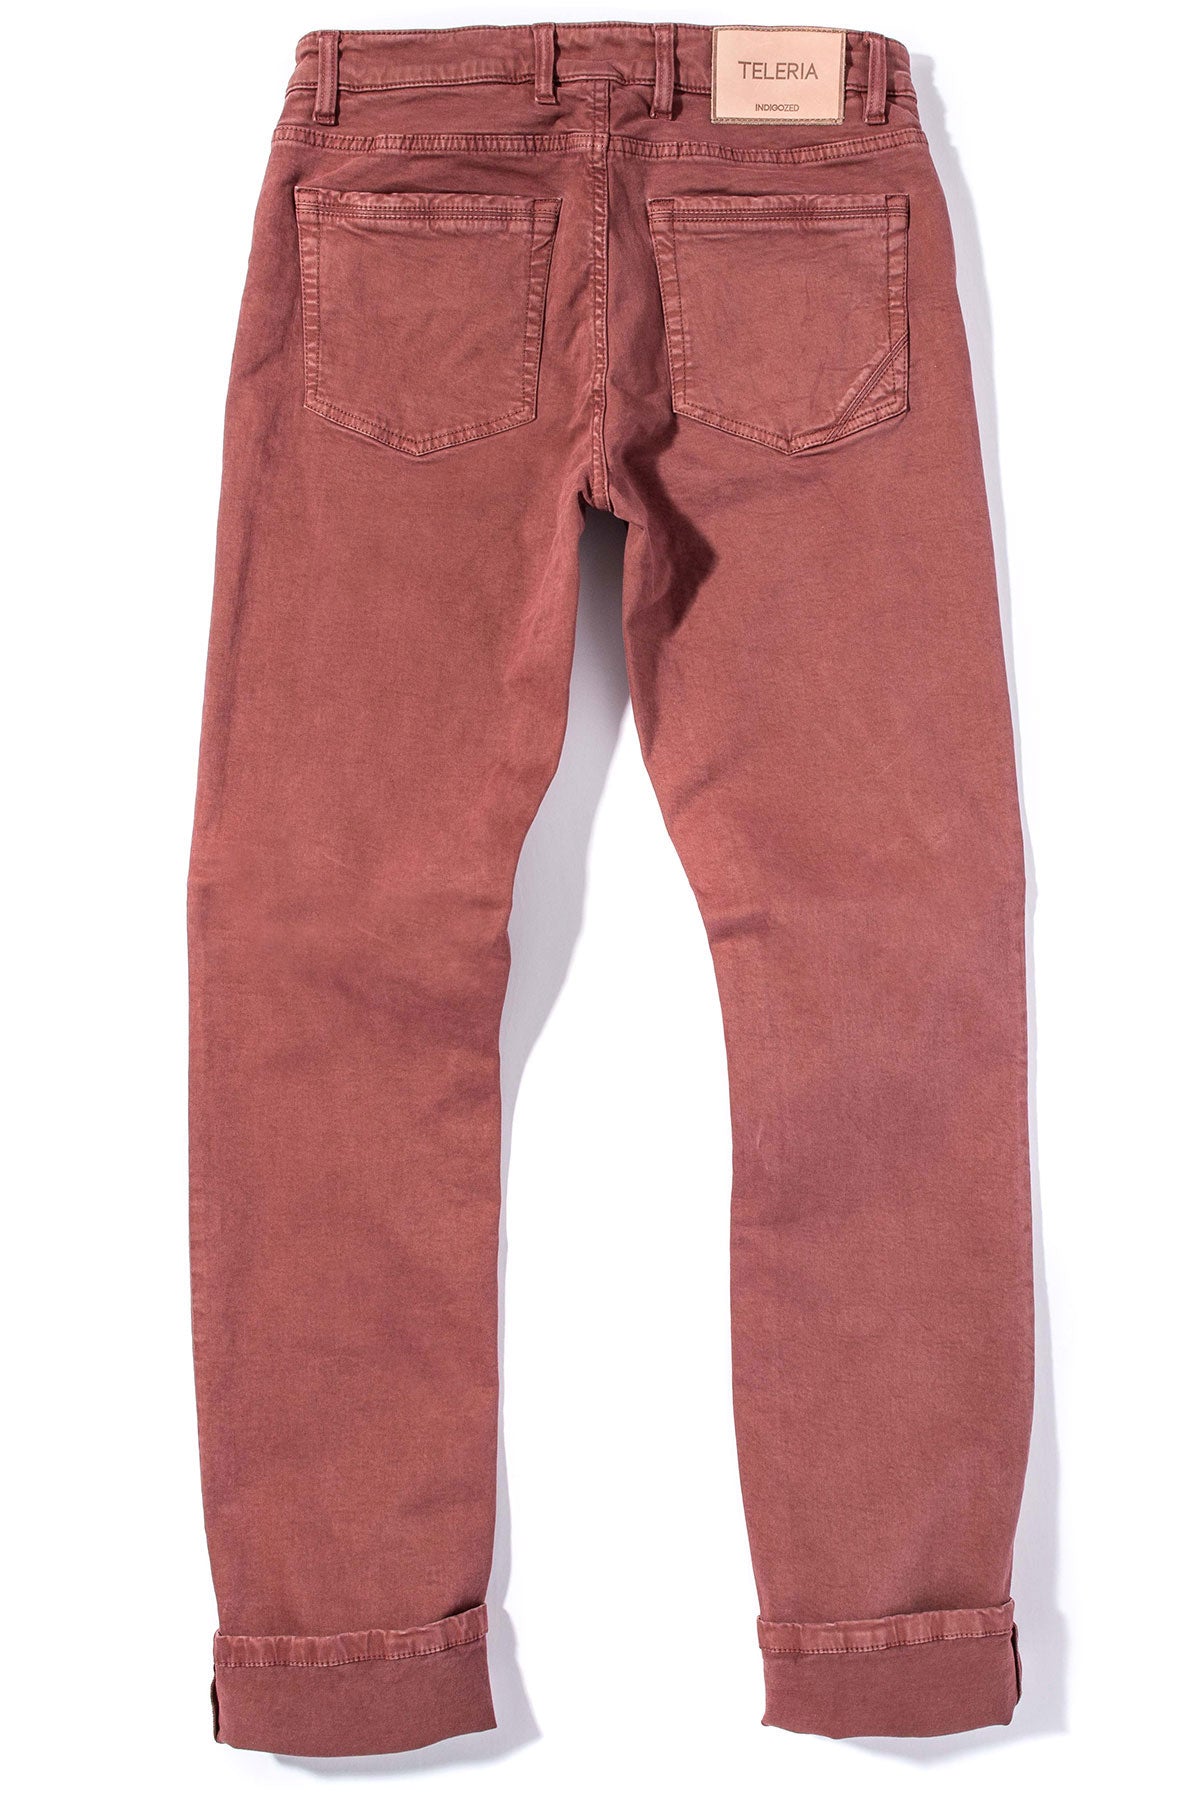 Ryland Rugged Soft Touch Cotton Jeans in Arancio | Mens - Pants - 5 Pocket | Teleria Zed